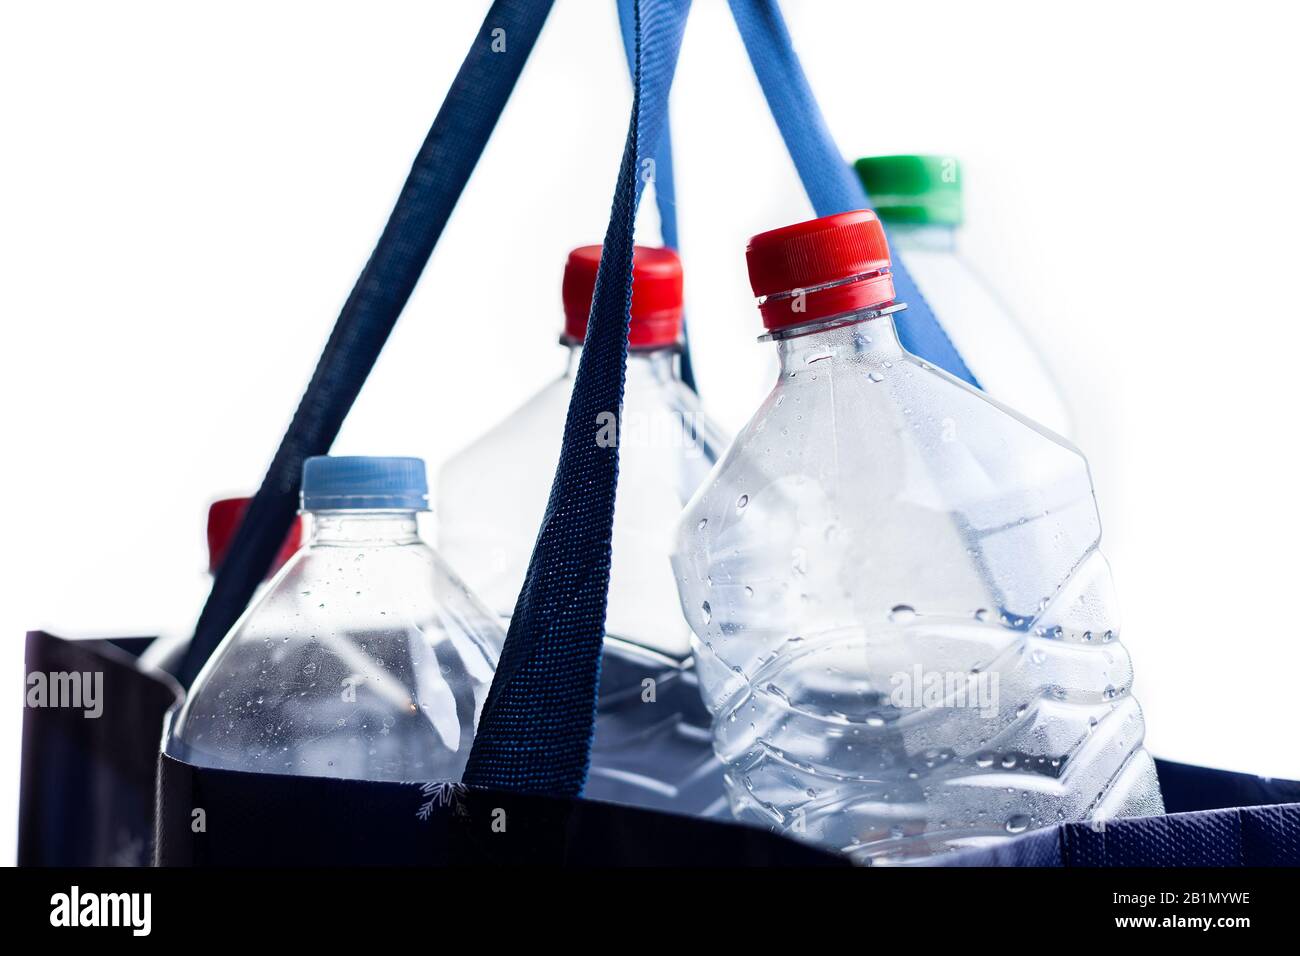 Used plastic bottles in a shopping bag. Ready to recycle. Say no to plastic consumption. Stock Photo